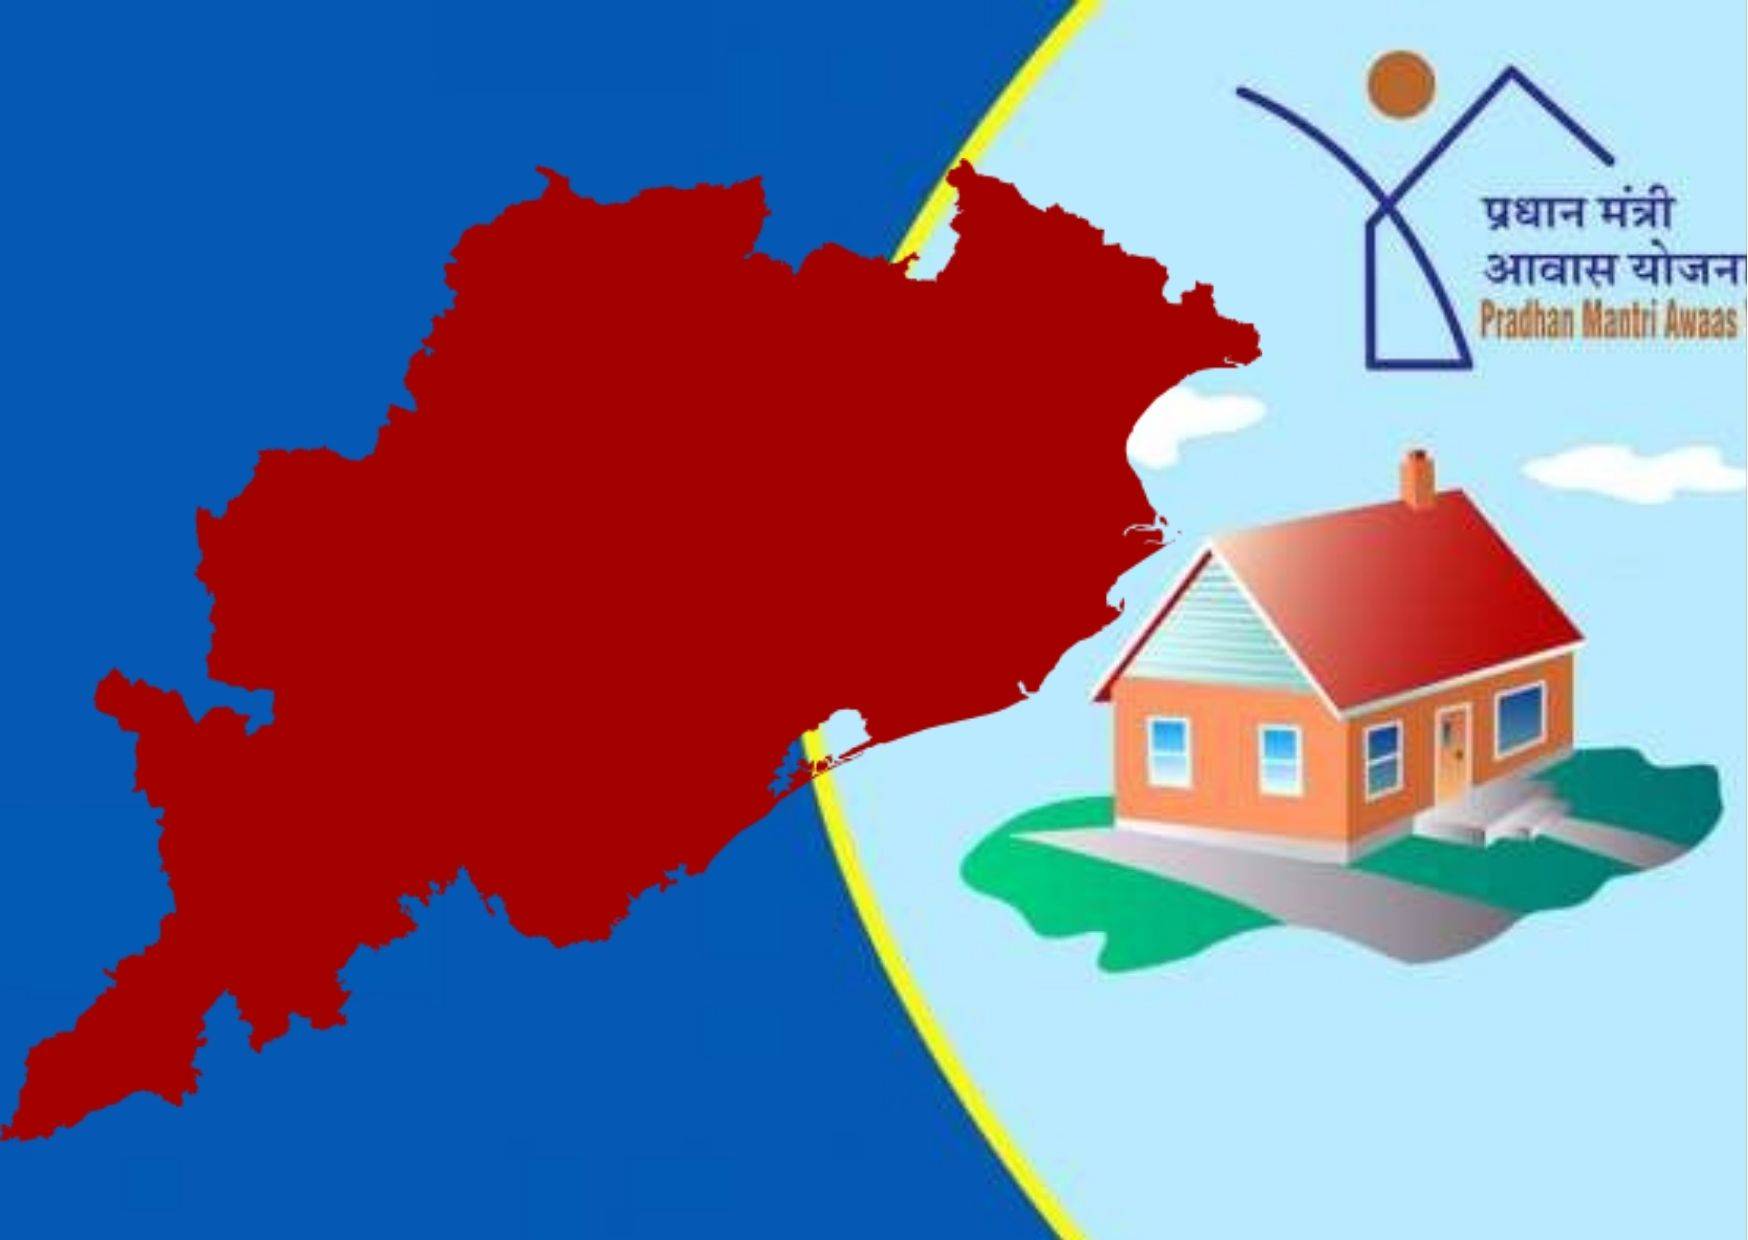 122.69 lakh houses sanctioned under the Housing for All Mission